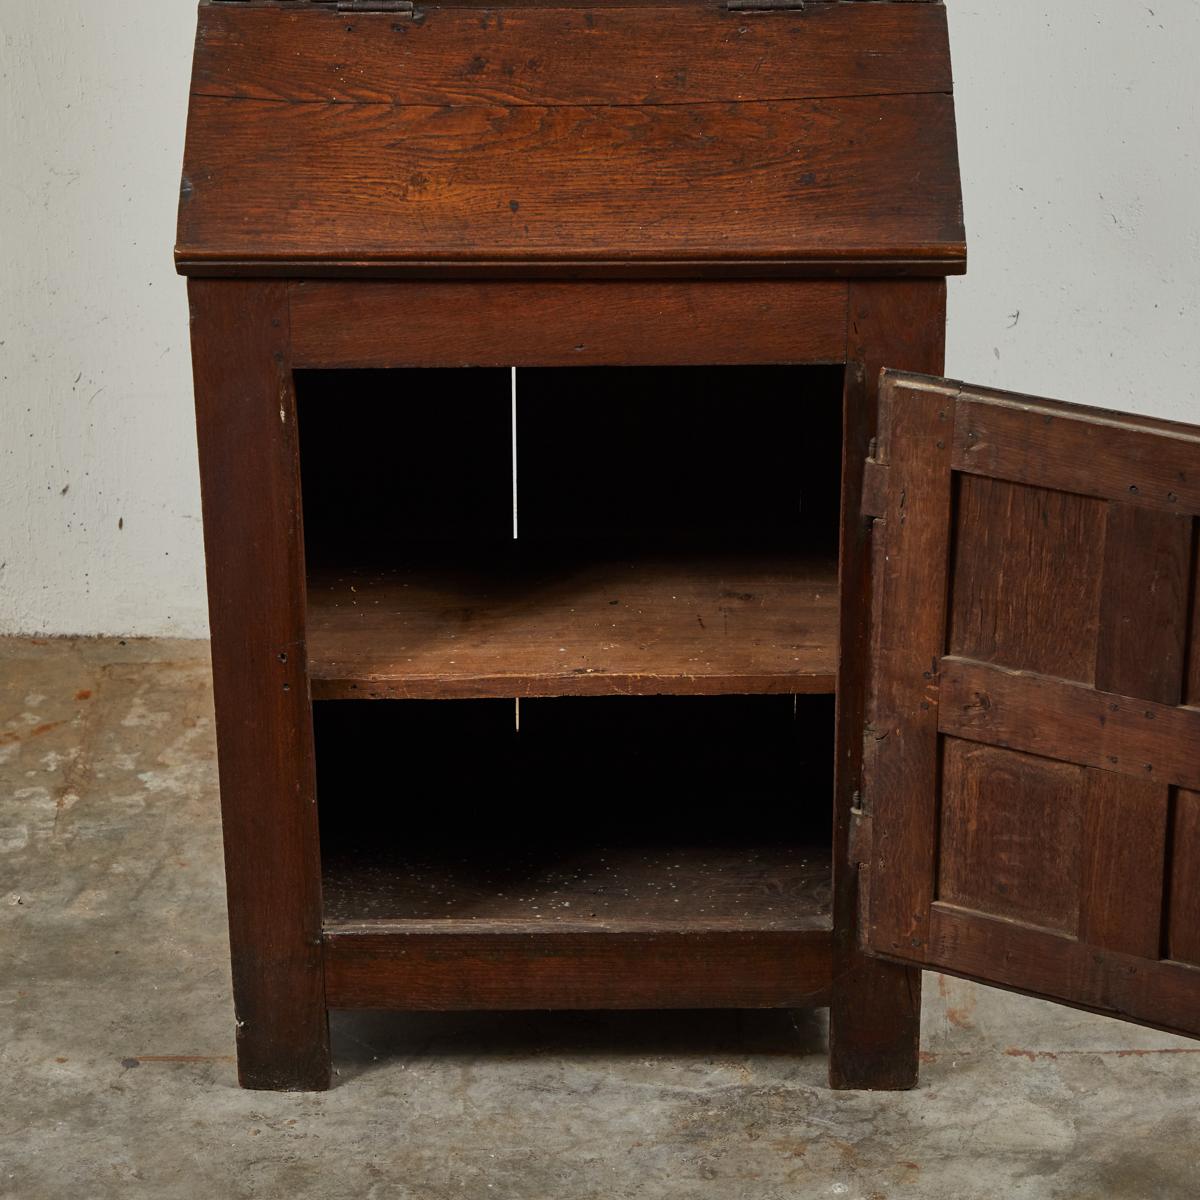 Wood Early 18th Century French Petite Secretaire or Bureau with Projecting Cabinet For Sale